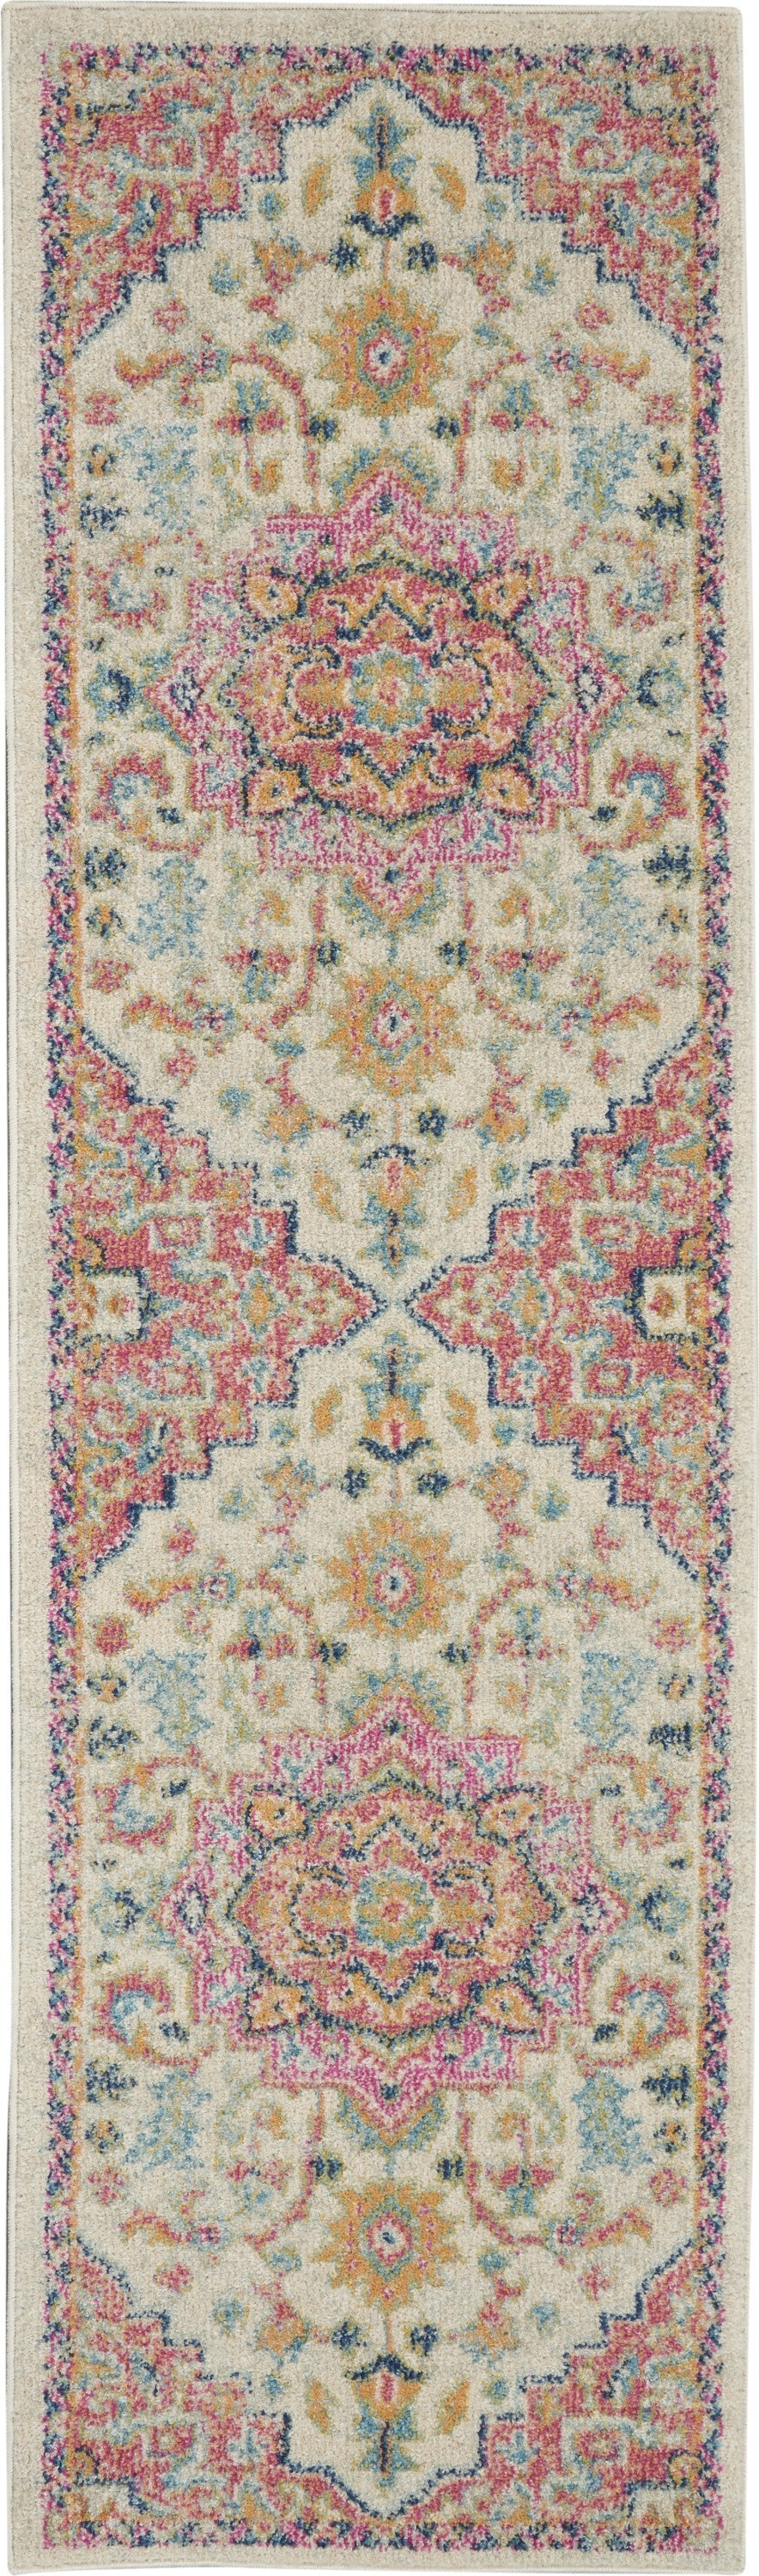 2’ X 8’ Ivory And Pink Medallion Scatter Rug